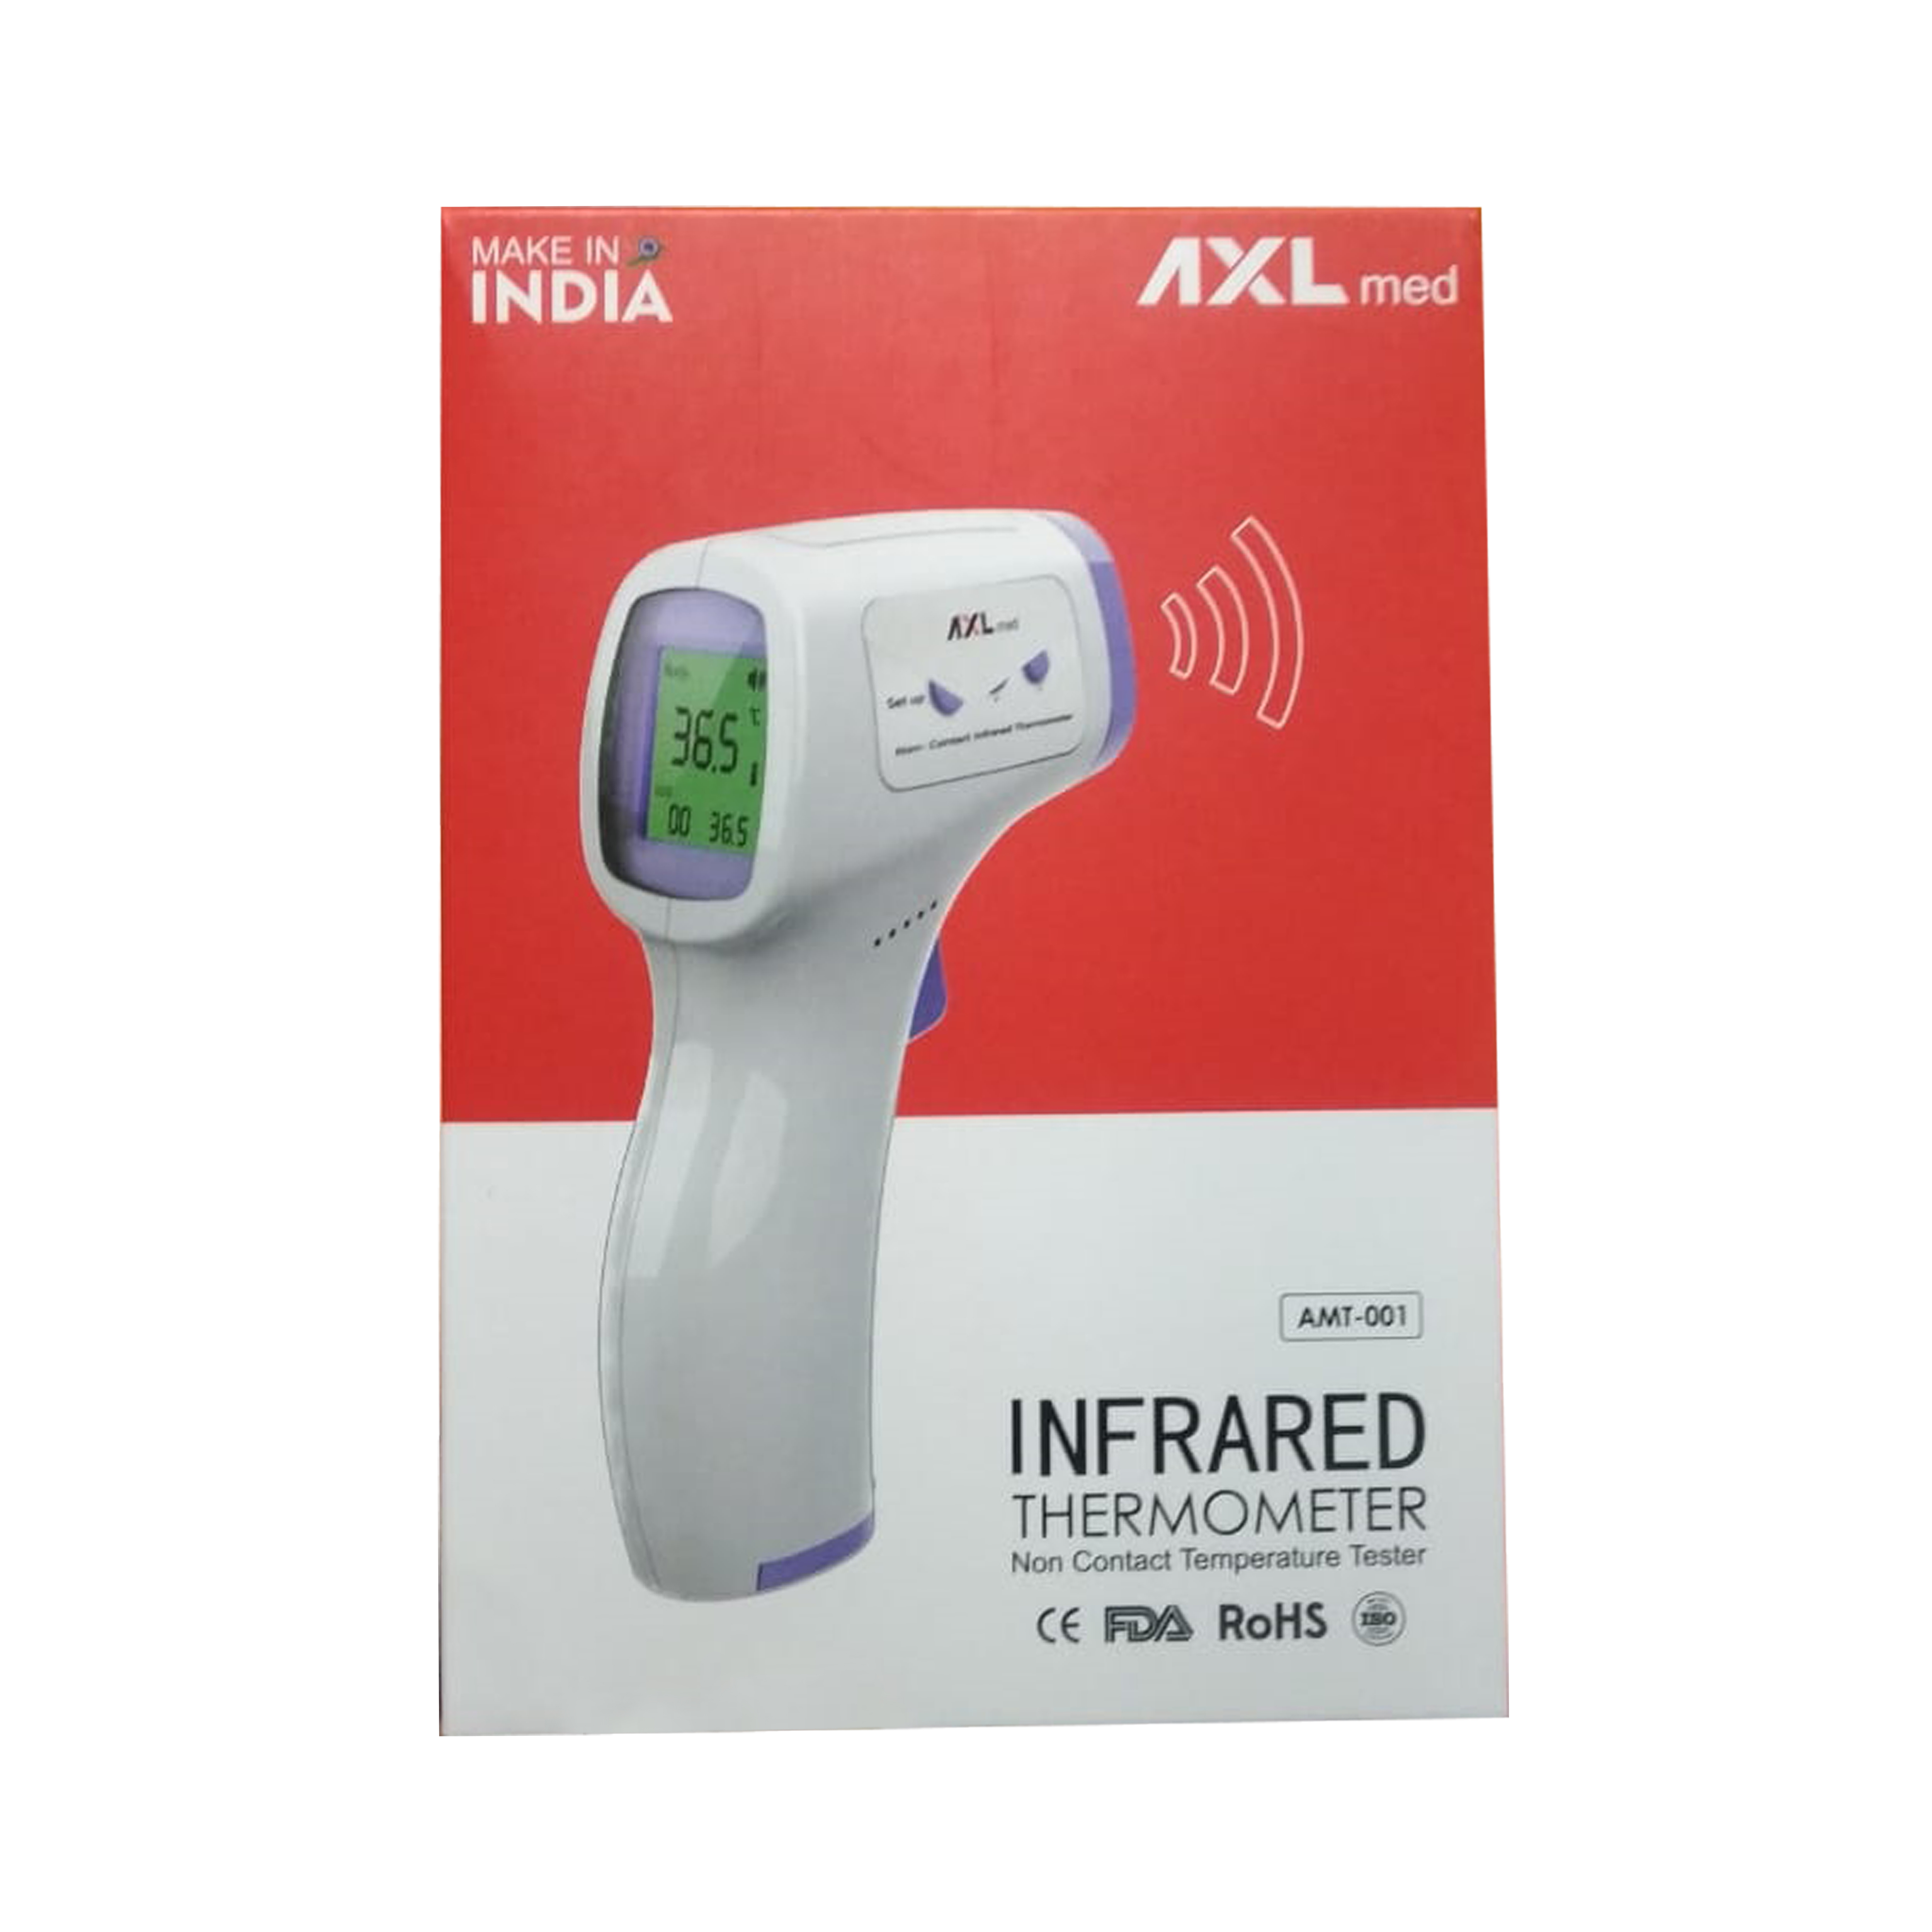 Buy Infrared Thermometer at Best Price Online